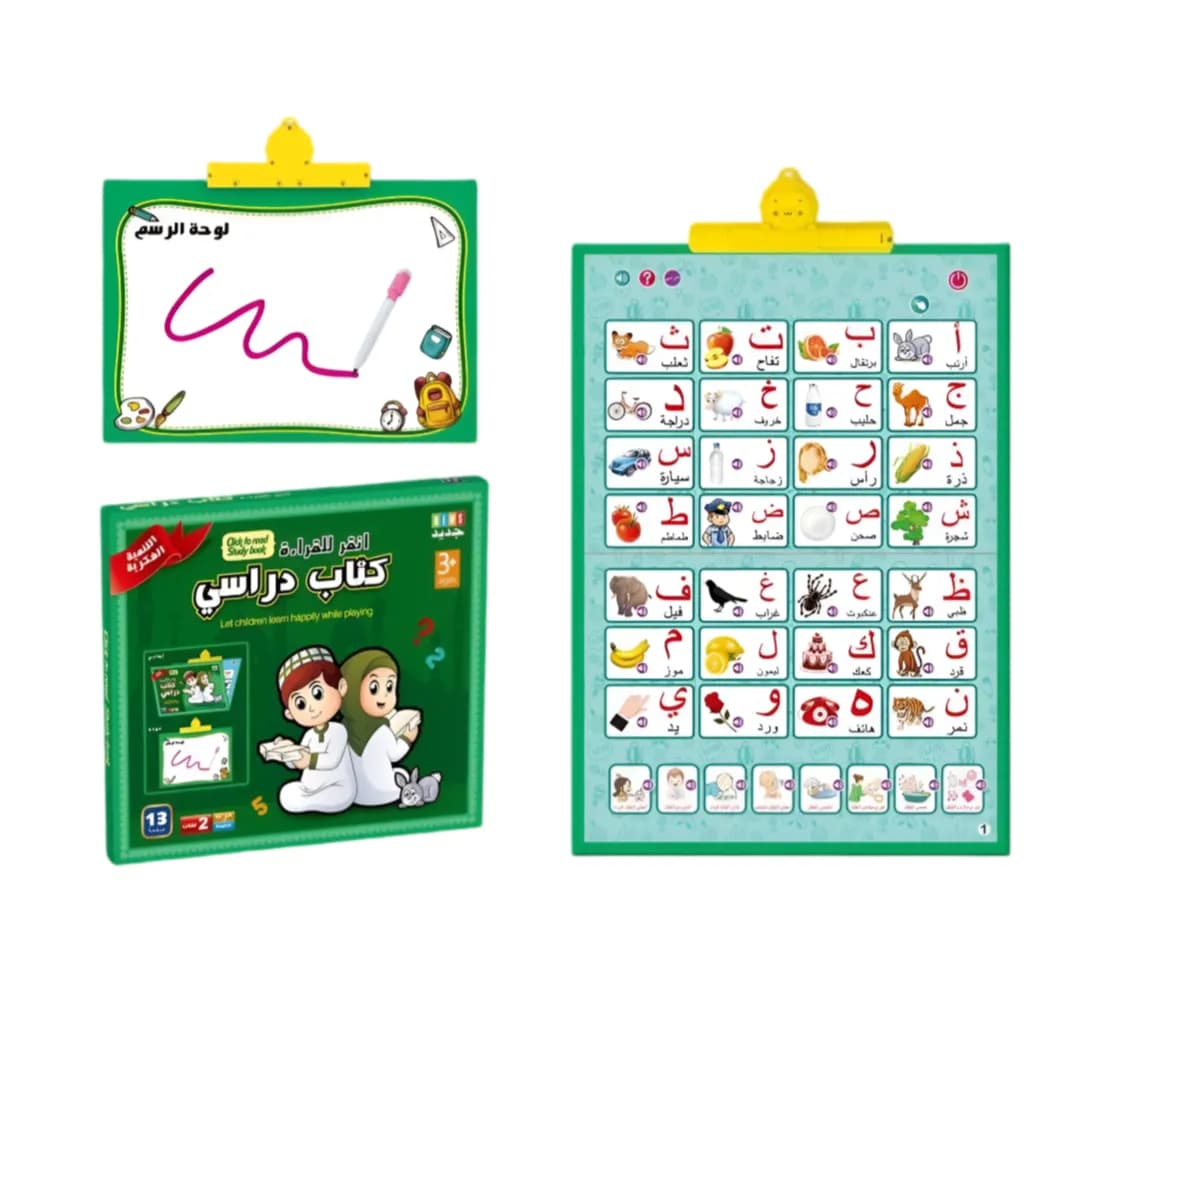 Multifunctional 2 In 1 Drawing Board With Learning Board For Kids - (LBWD17)